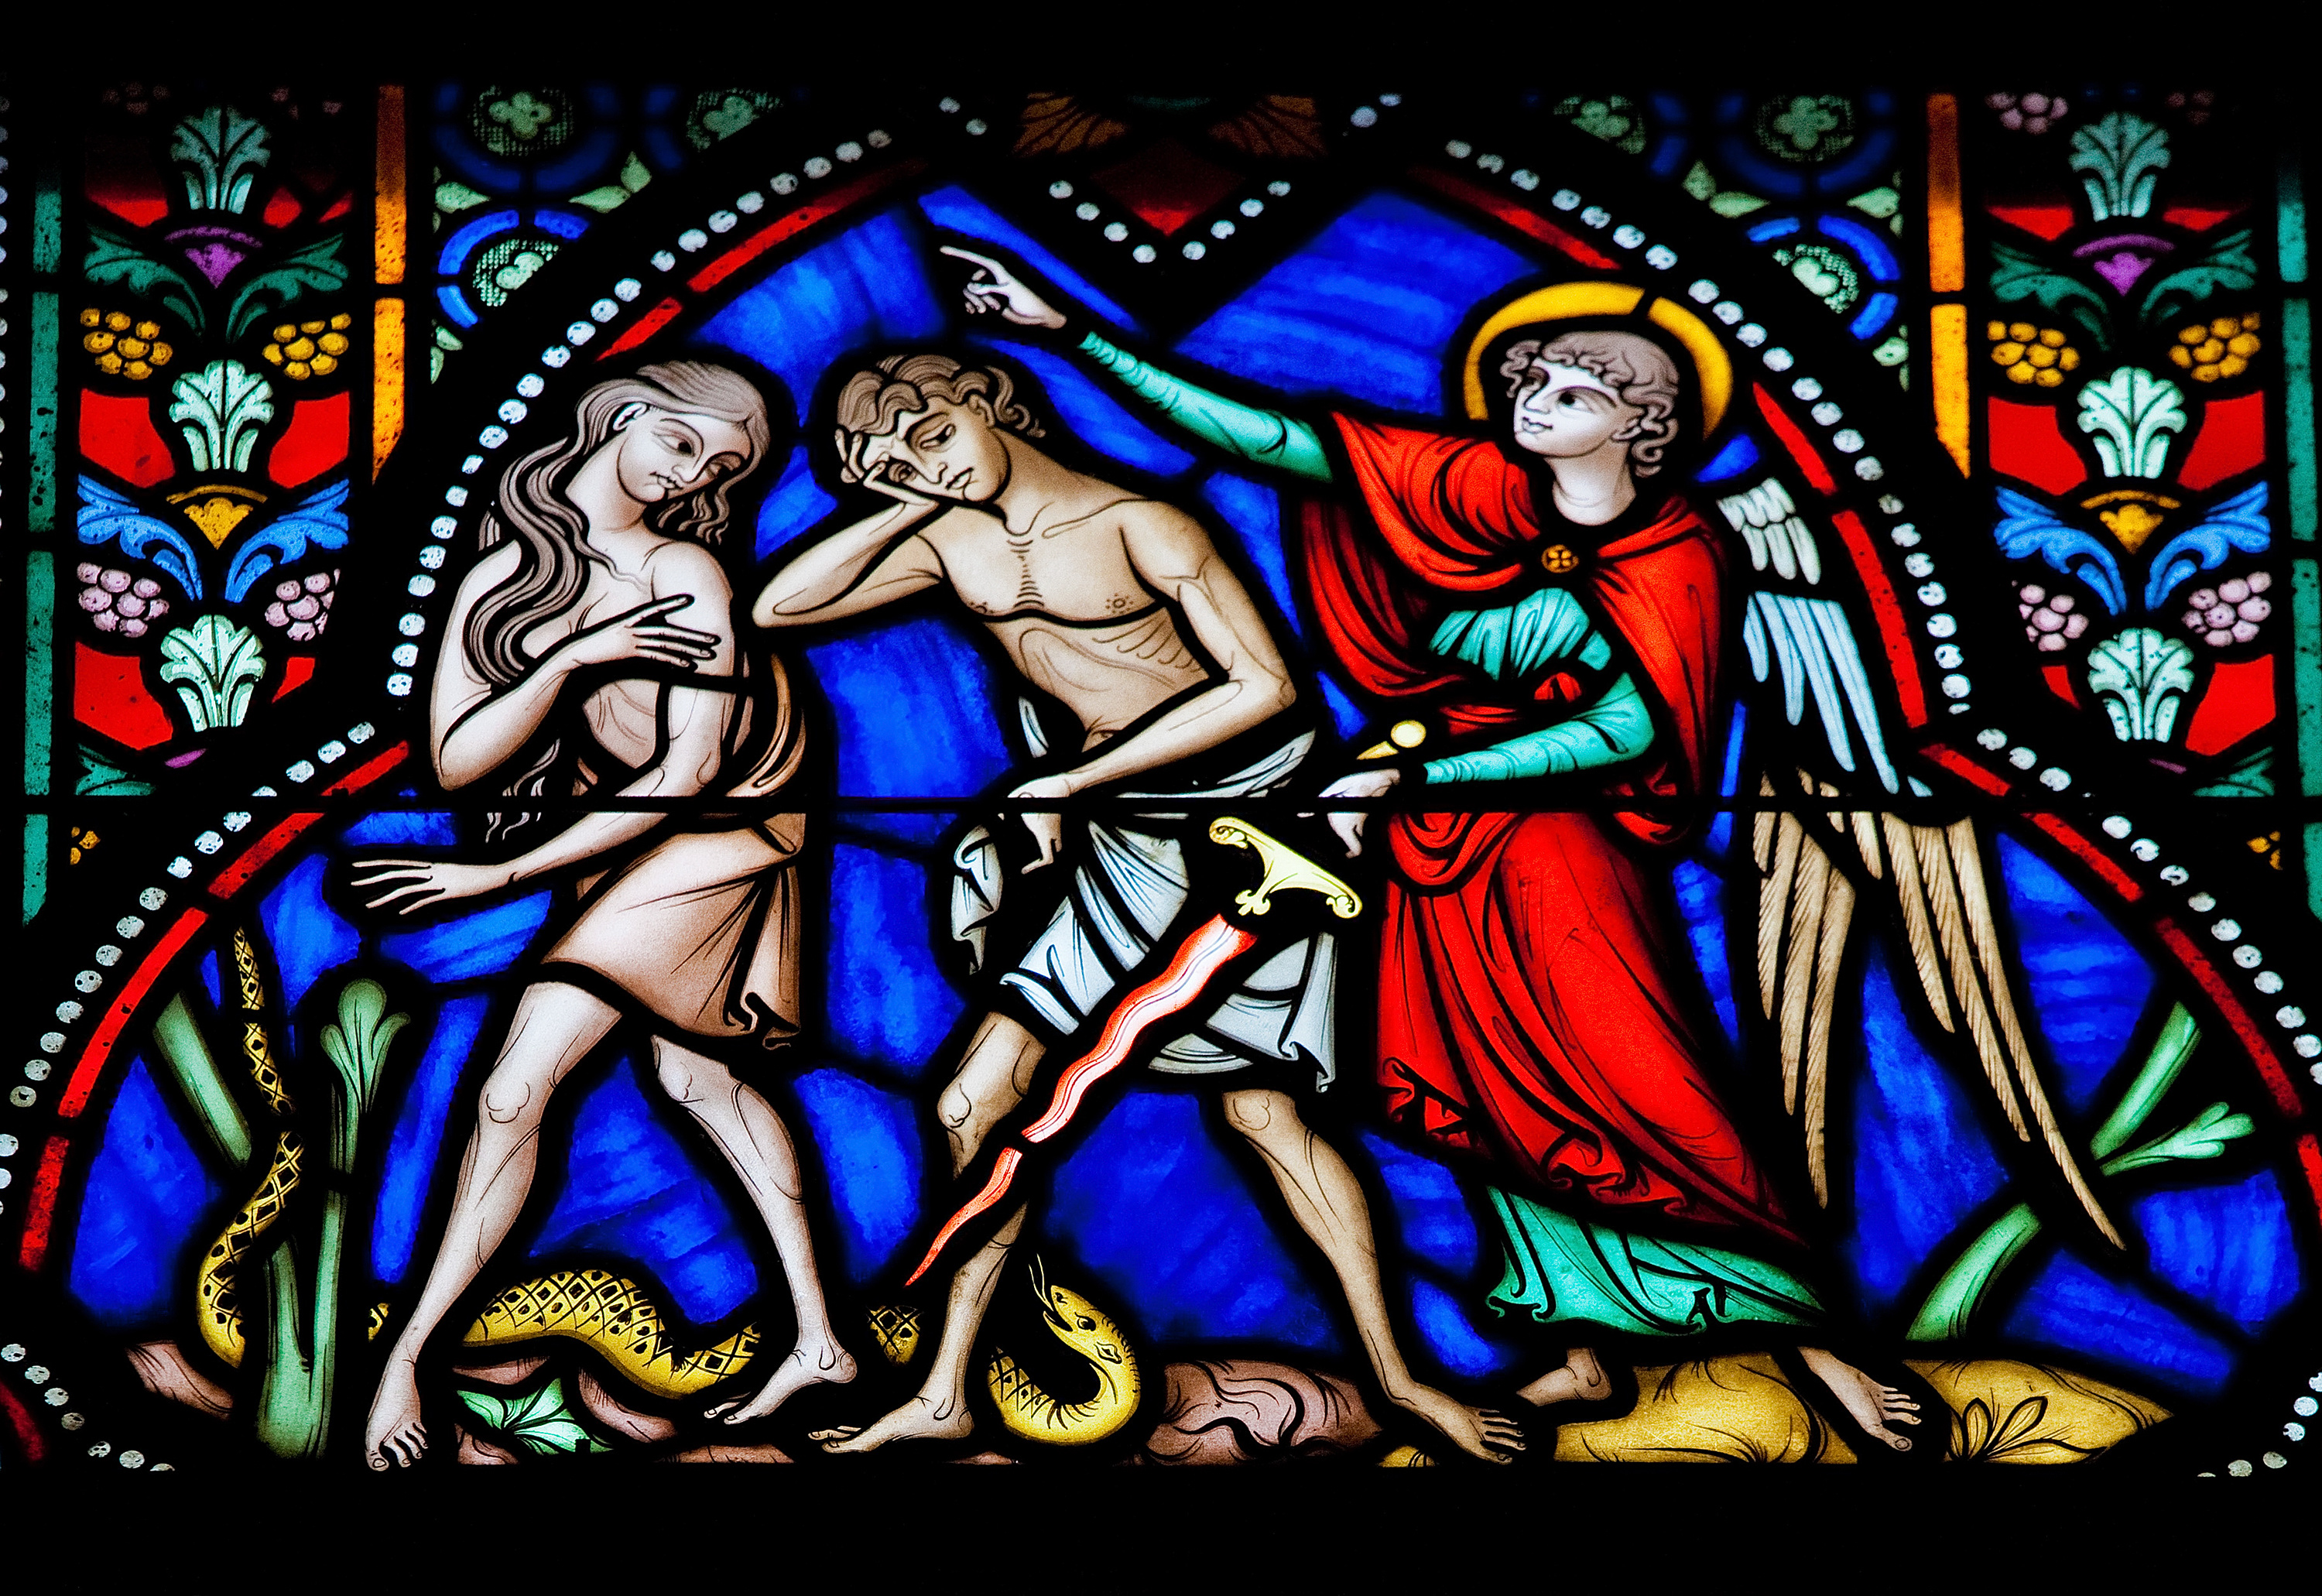 &ldquo;The Sinners are Expelled from Paradise&rdquo; stained glass panel from Auxerre Cathedral